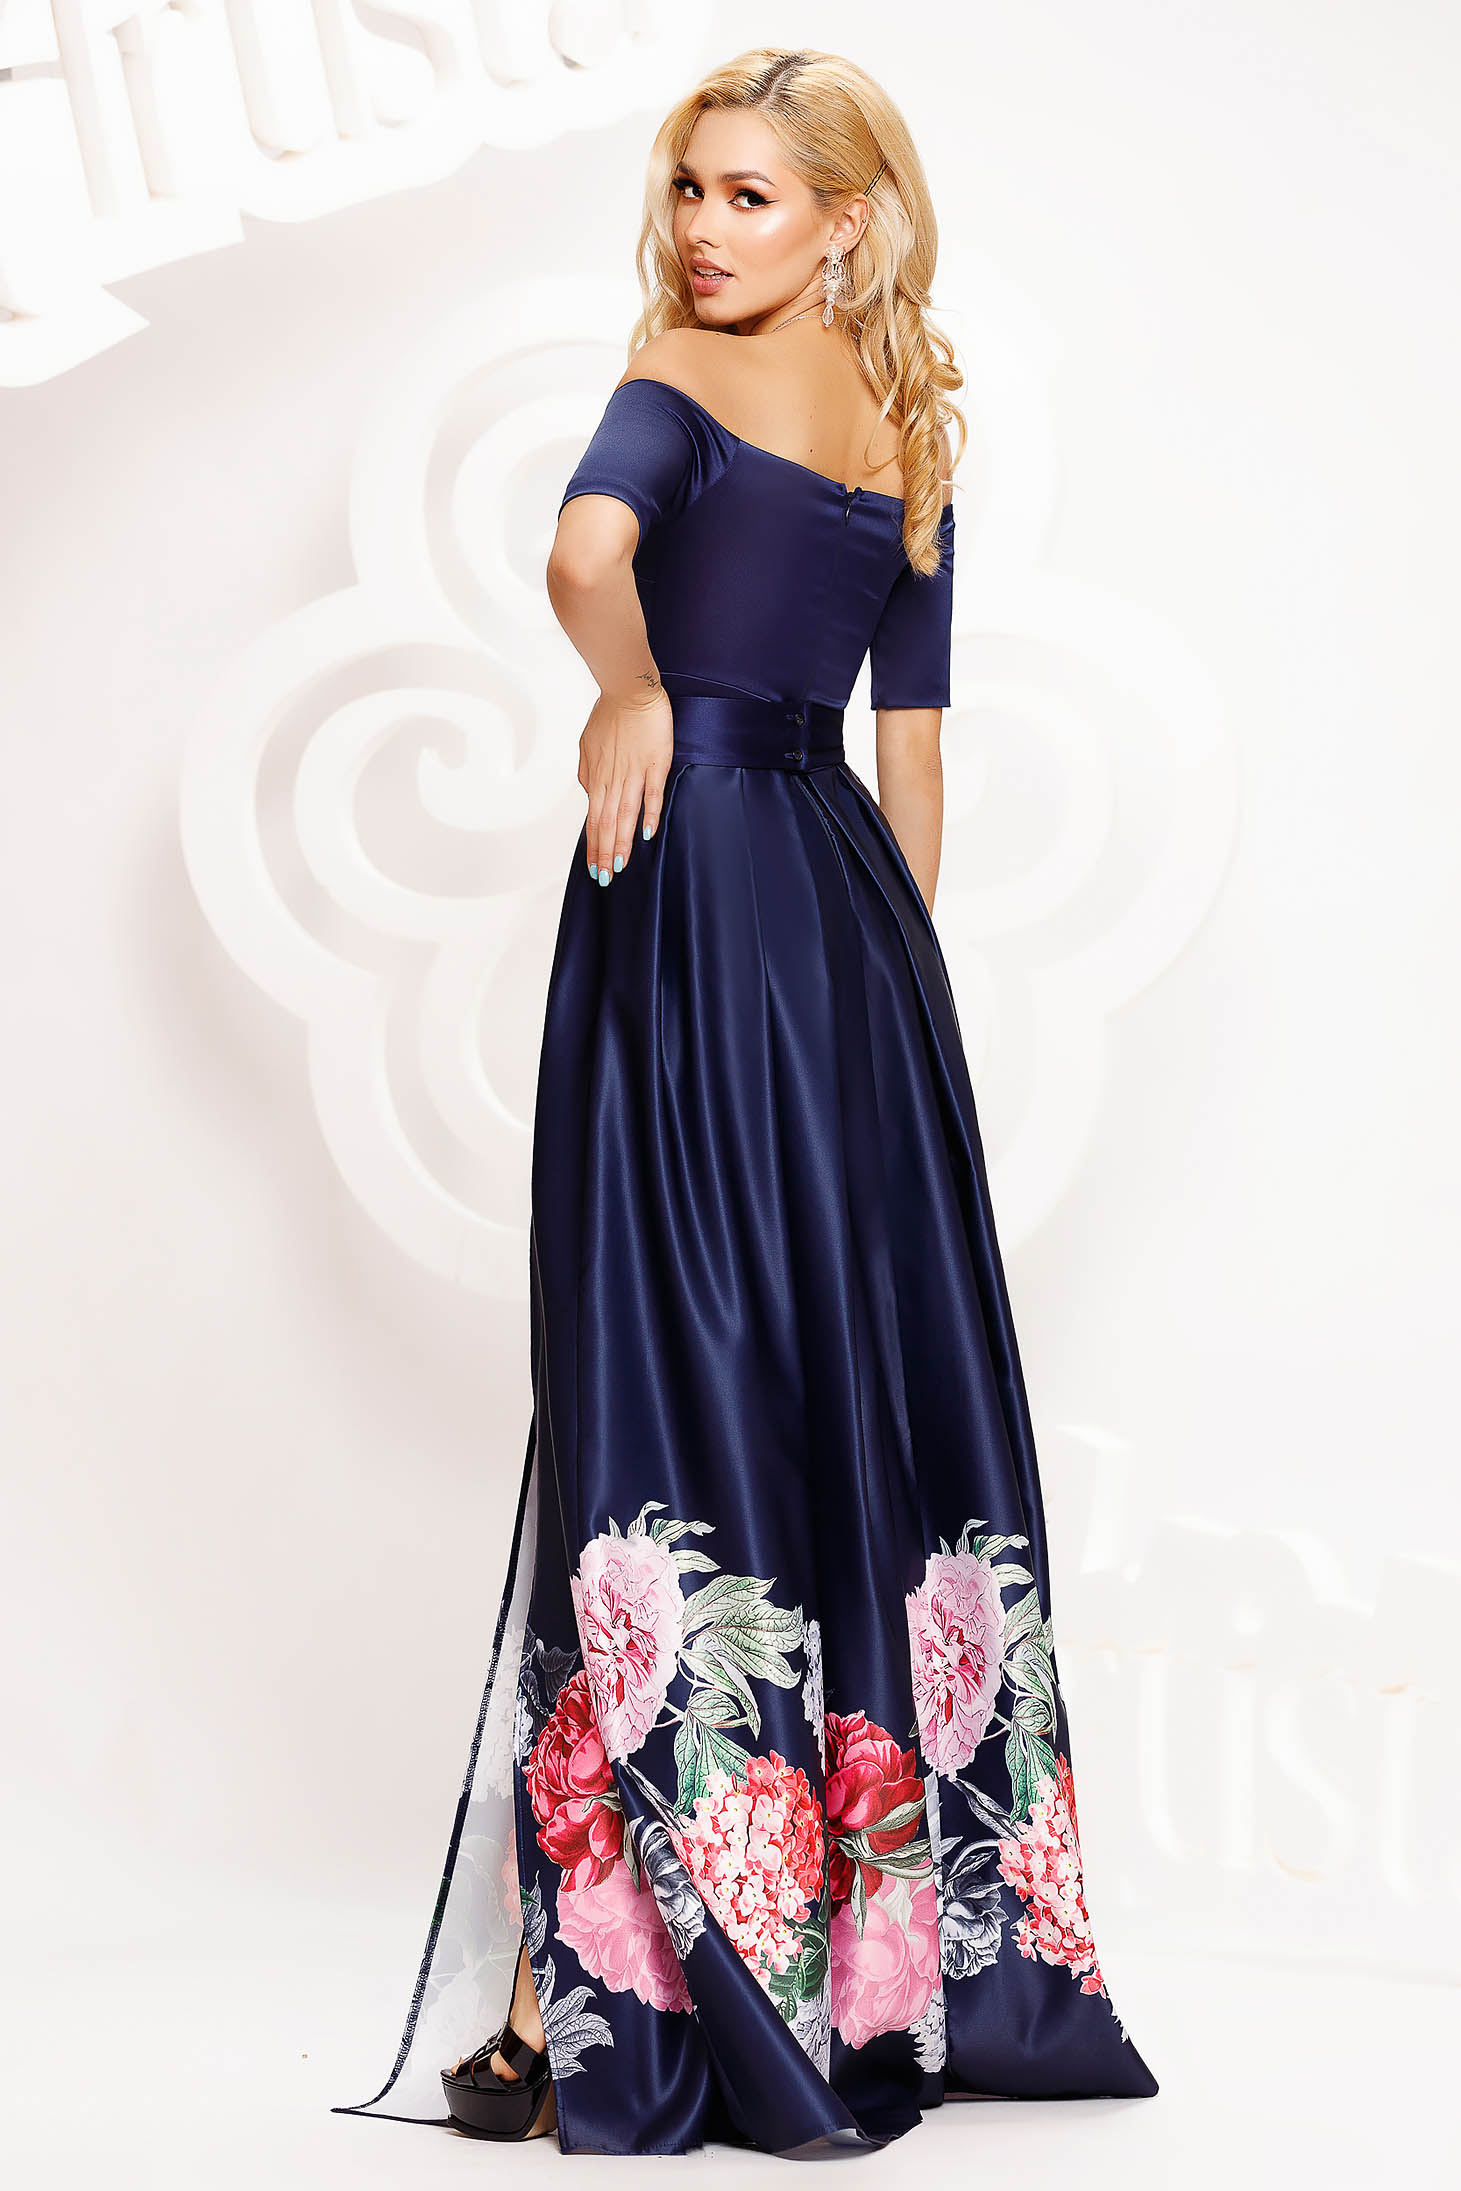 Long navy blue taffeta dress with bare shoulders and floral print - Artista 2 - StarShinerS.com